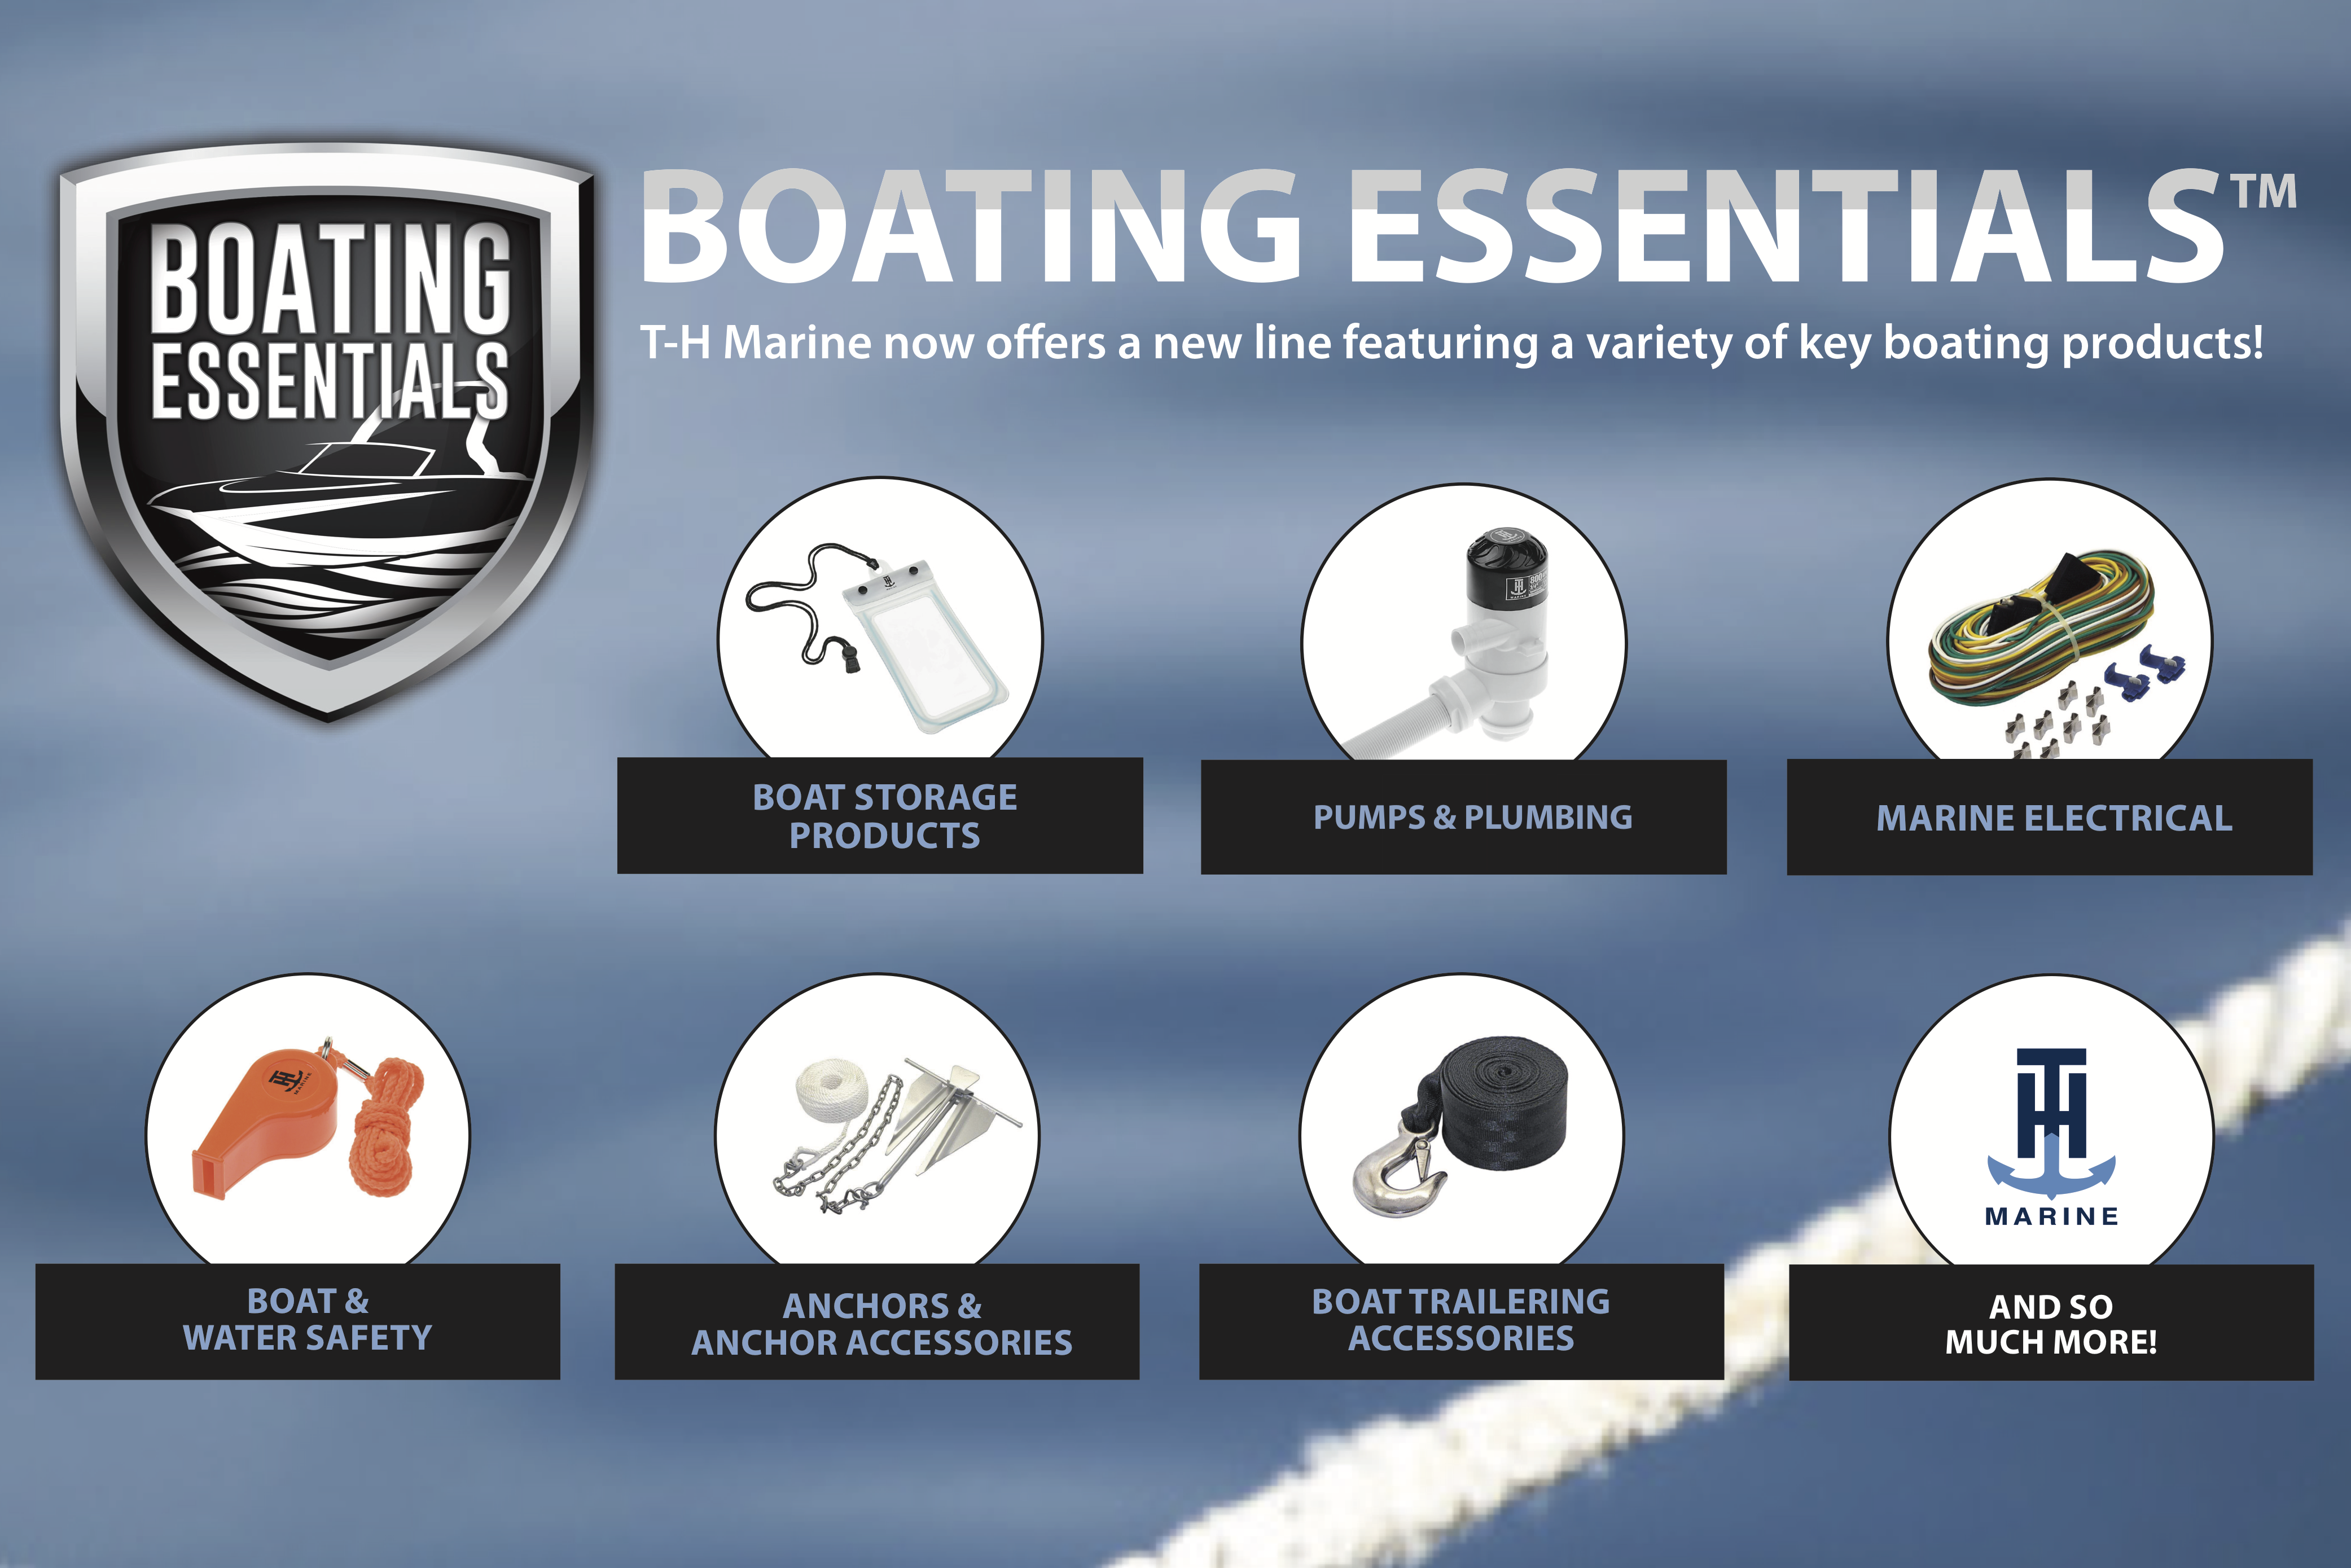 <h4>BOATING ESSENTIALS Everyday Boat Accessories </h4> With T-H Marineâs new BOATING ESSENTIALS product line, itâs now easier than ever before to make purchases of the everyday fishing and boating items you need. 
<BR><BR>
BOATING ESSENTIALS includes a variety of products made for boaters of every type. Whether you need ropes, fenders, marine electrical components, fuel line components, or one of the many other products in the line, you can shop them easily, find them at a great prices, and get them delivered right to your door.
<BR><BR>
<a href=